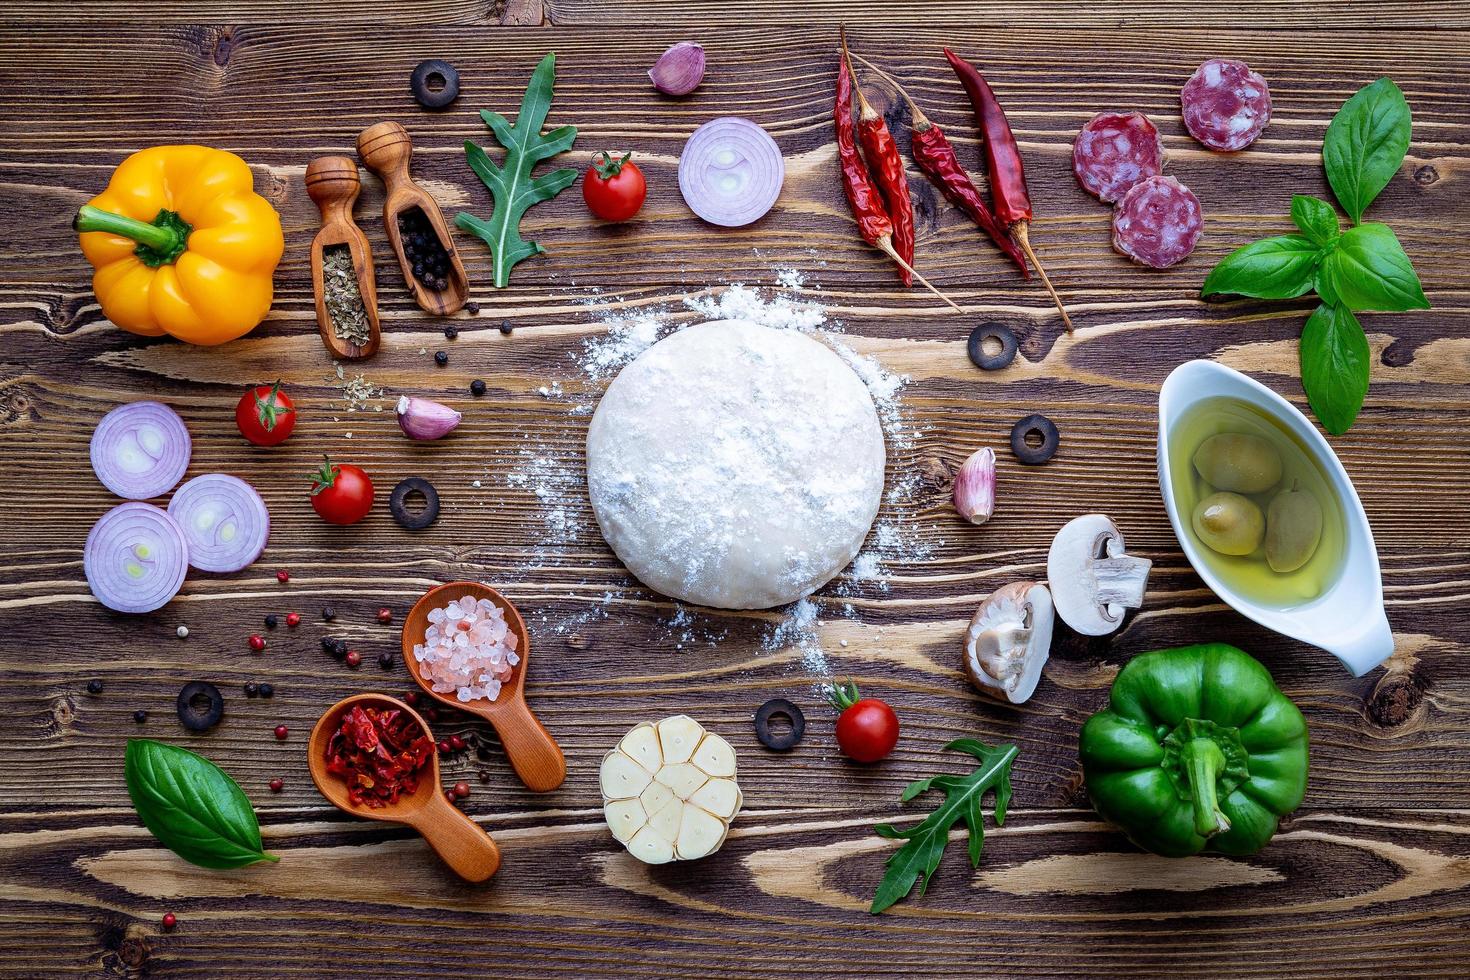 Top view of pizza dough and toppings photo